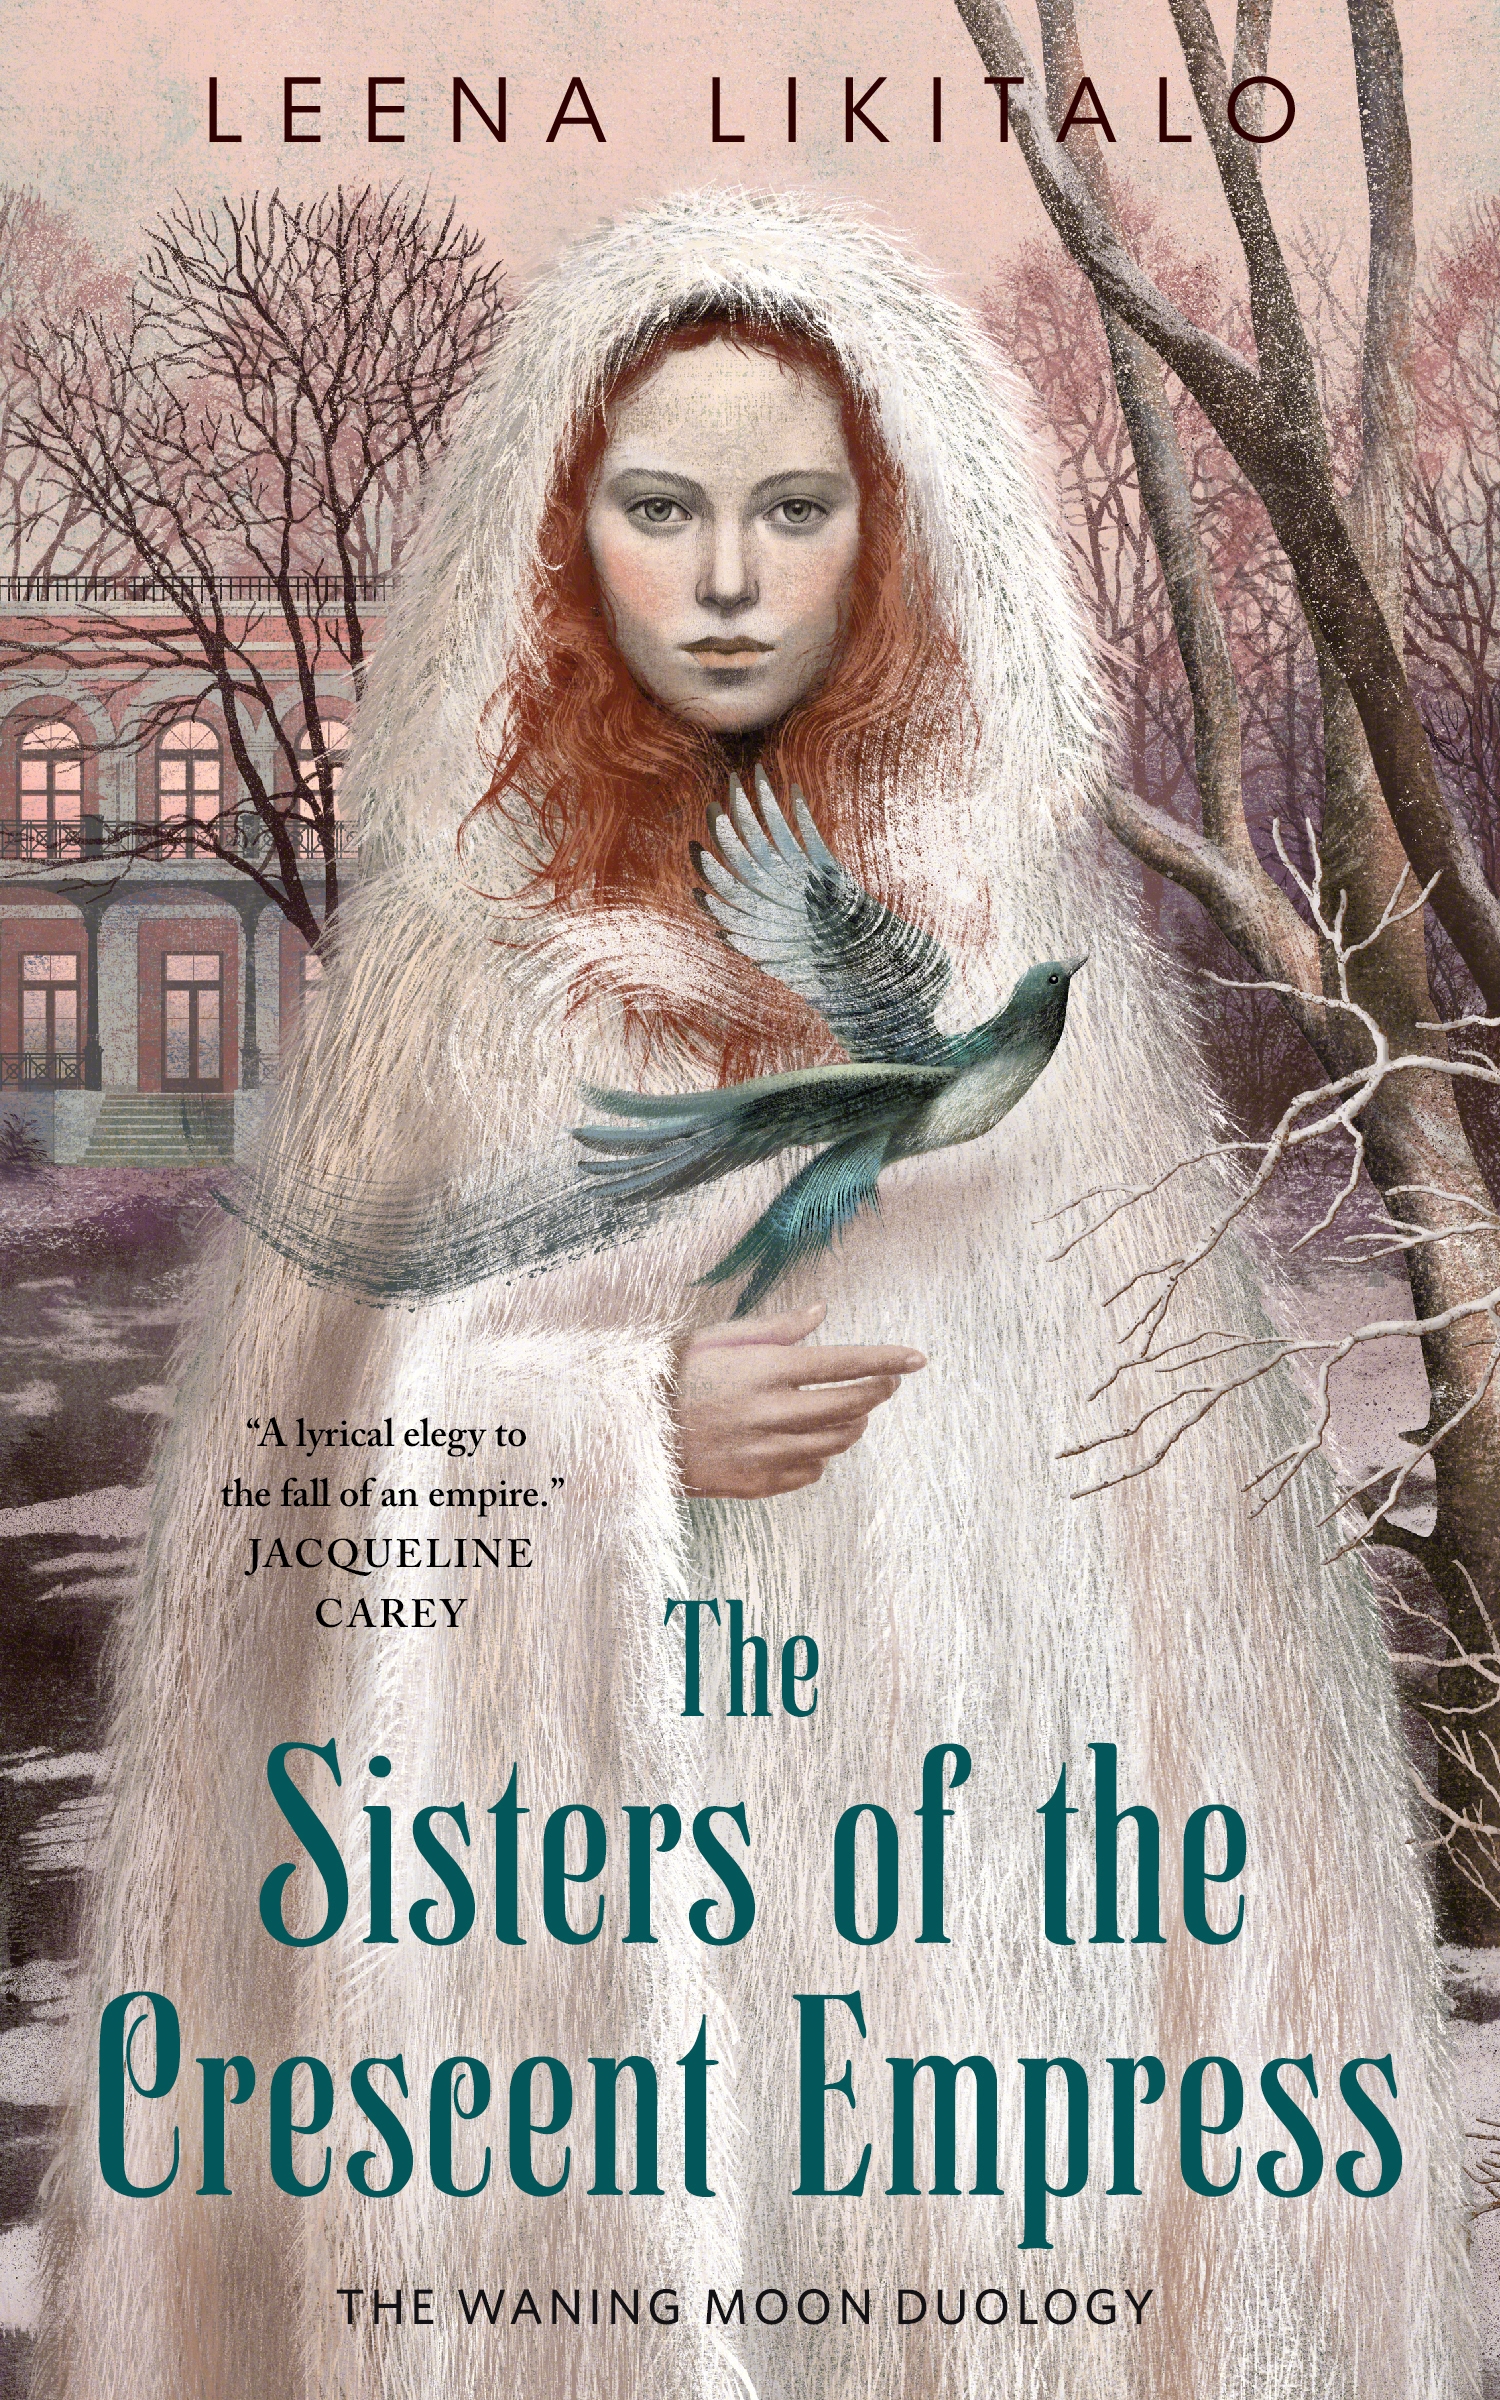 The Sisters of the Crescent Empress : The Waning Moon Duology by Leena Likitalo